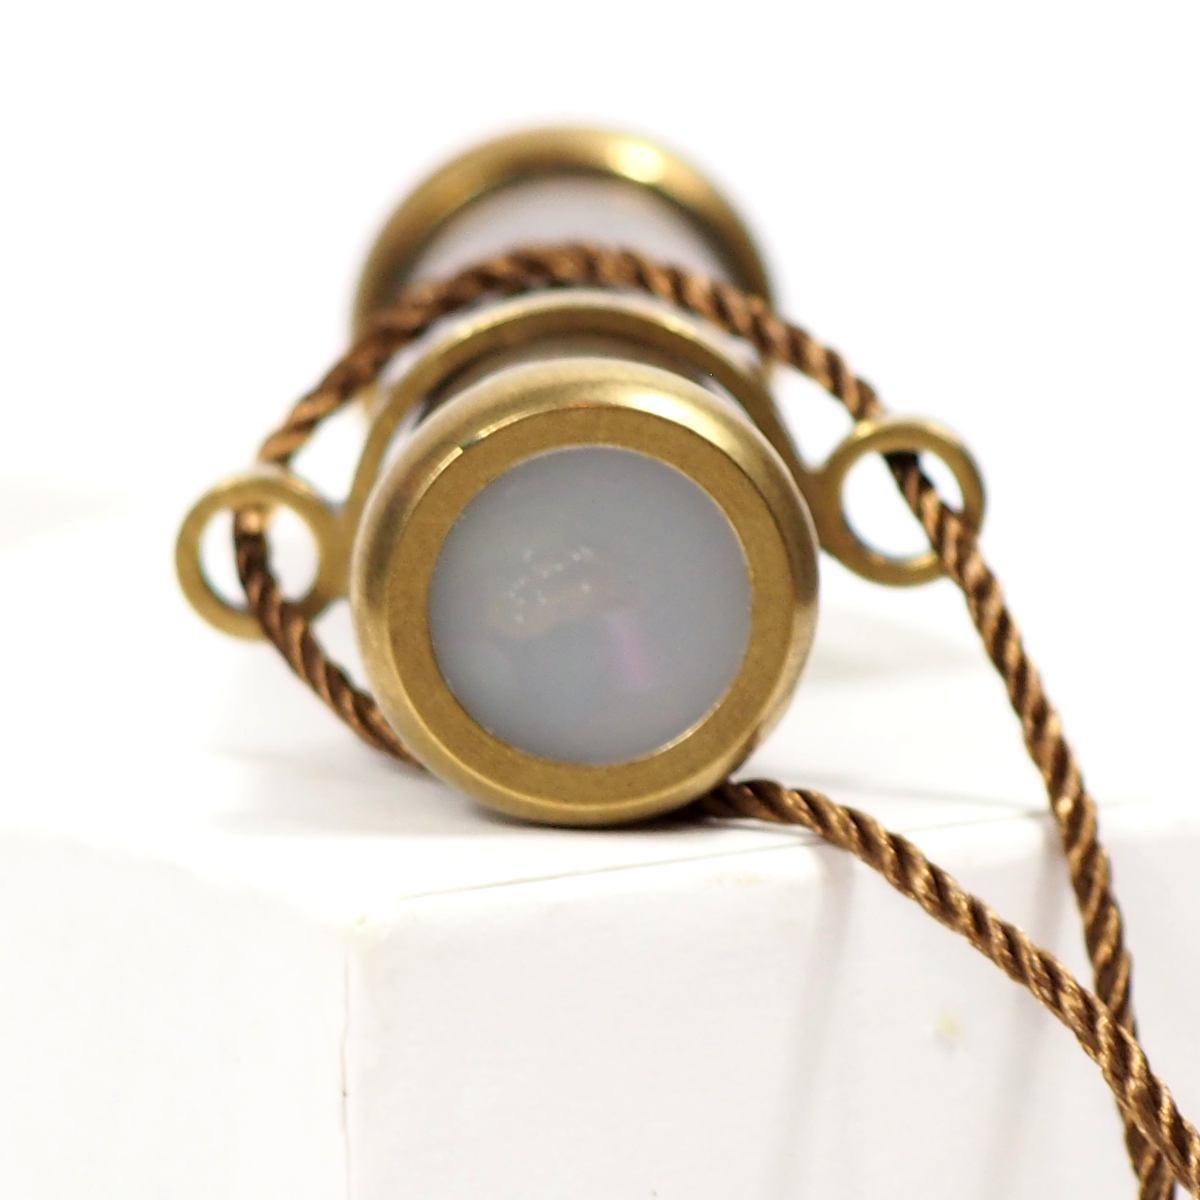 Mini Sand – Small Kaleidoscope made of Brass with Carrying Cord